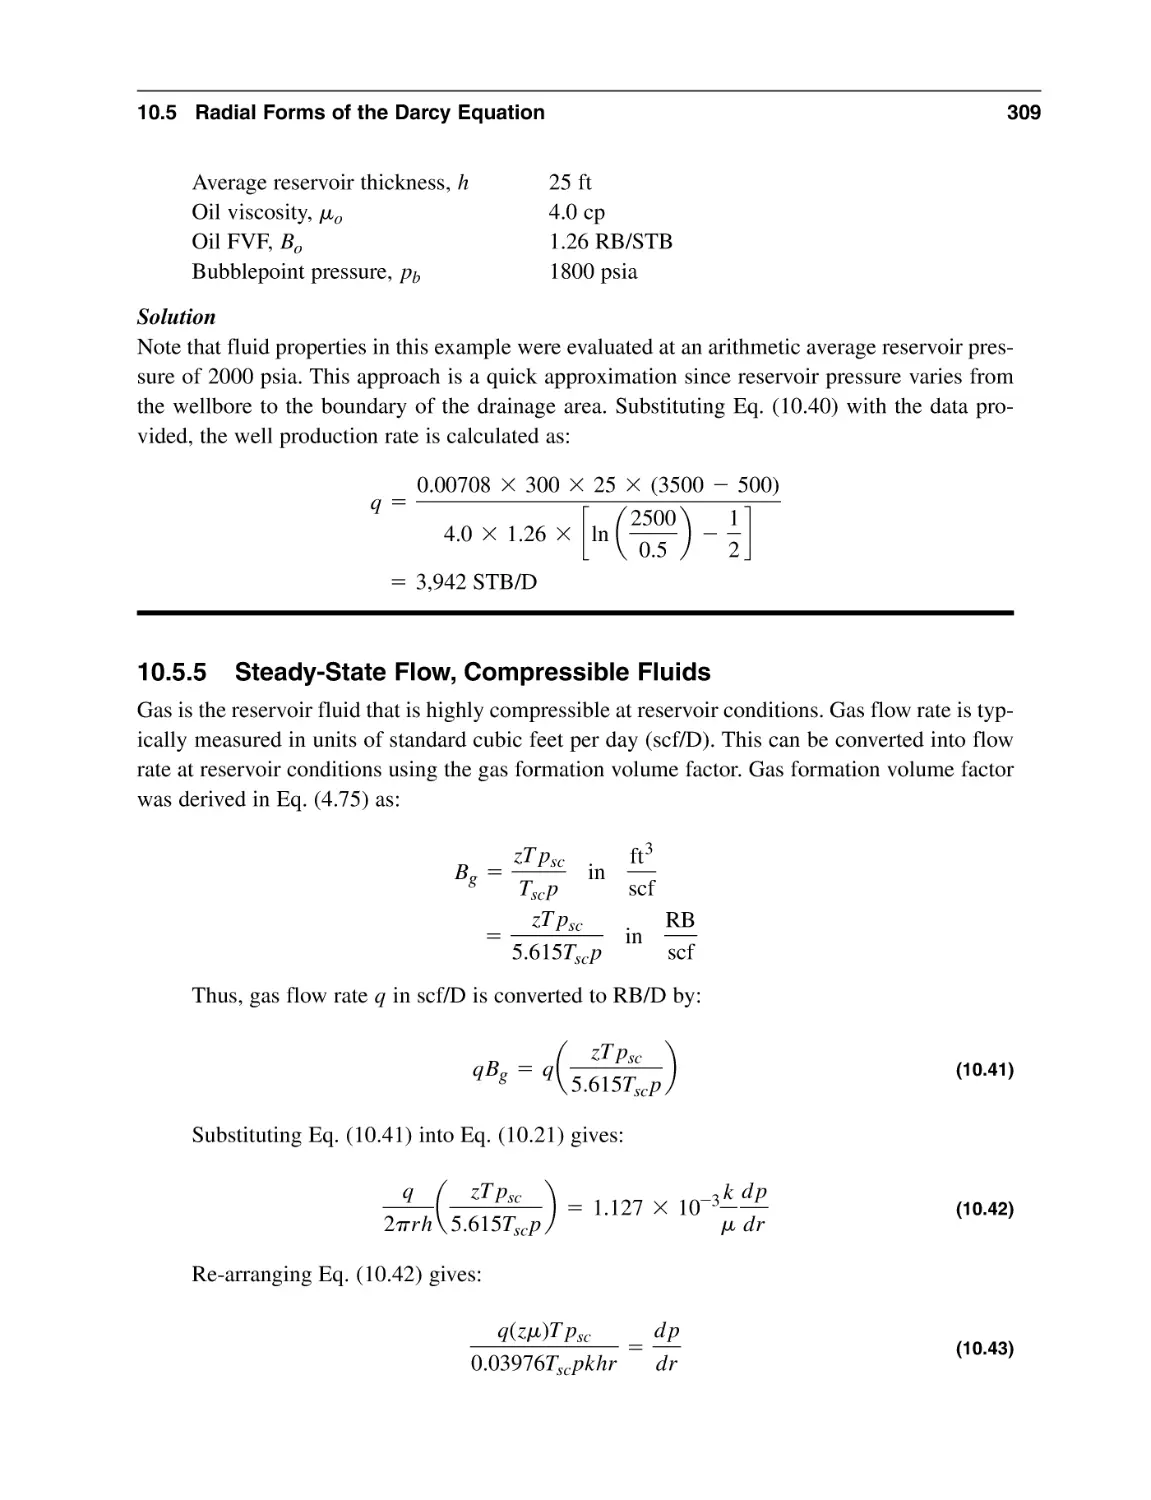 10.5.5 Steady-State Flow, Compressible Fluids